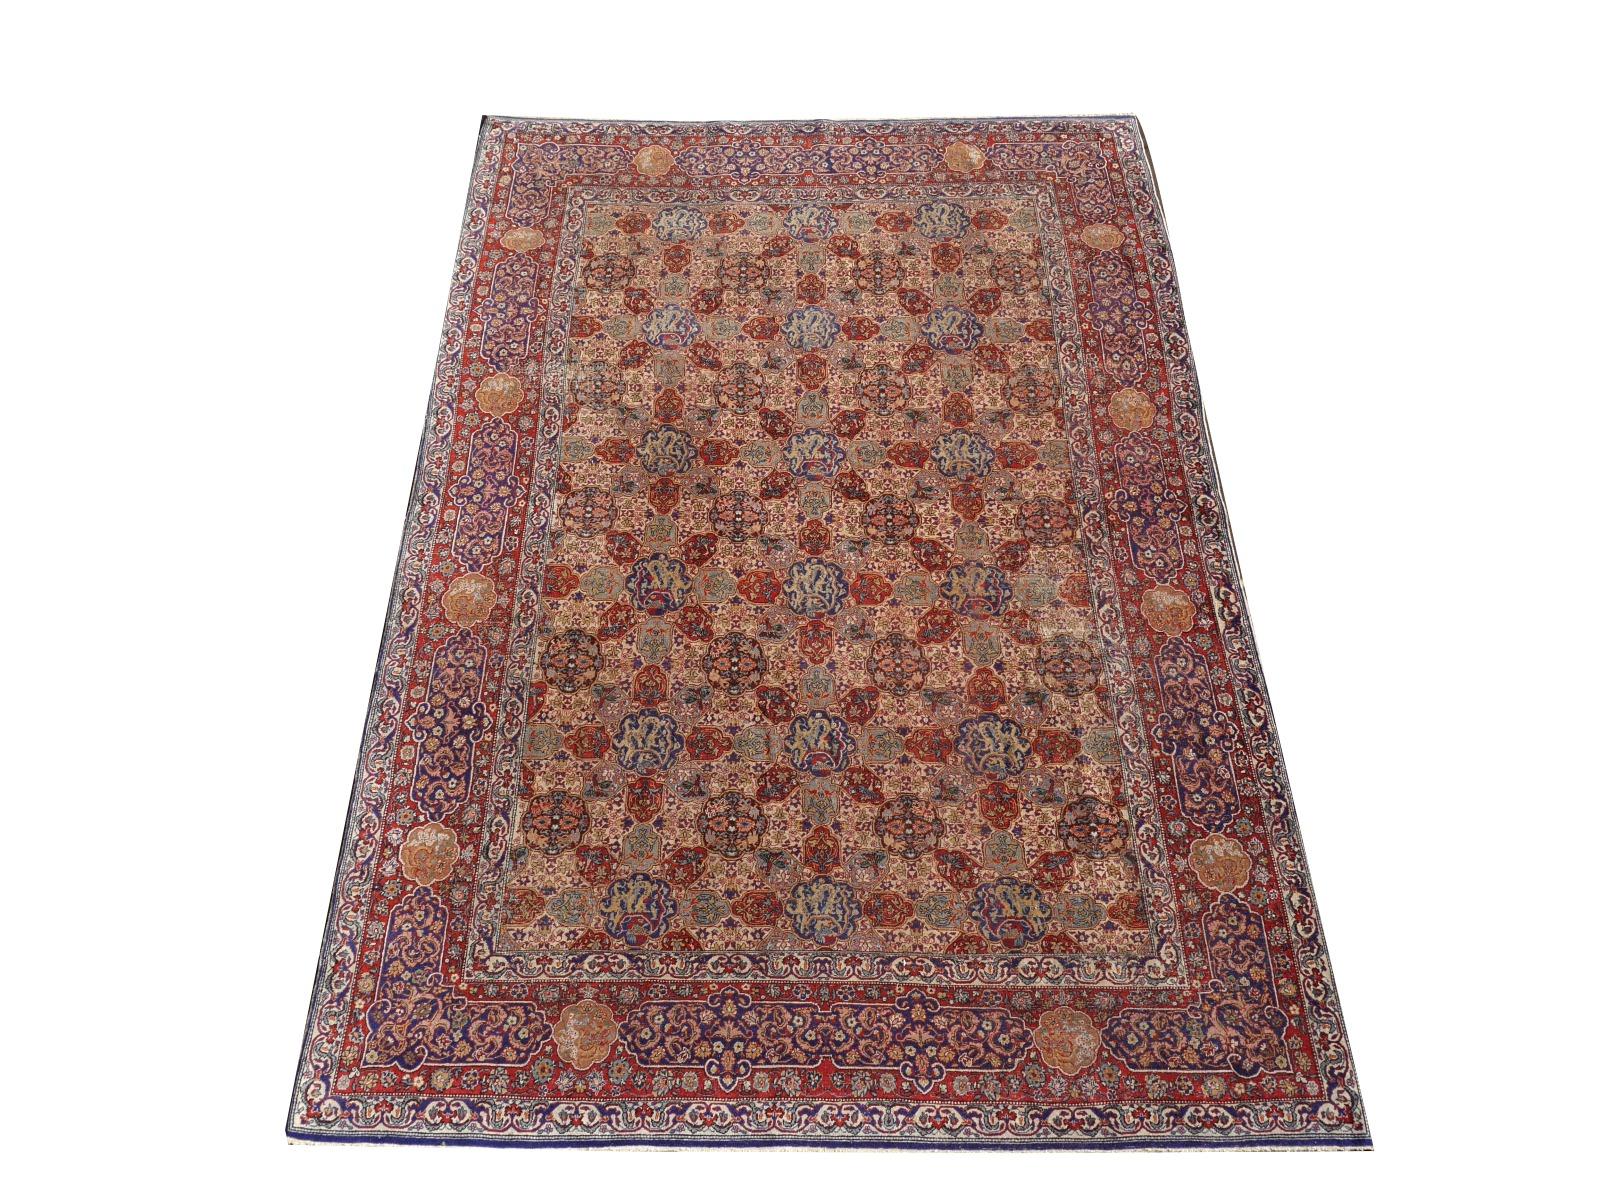 Wool Antique Dragon Rug Hand Knotted in Hereke Turkish Carpet For Sale